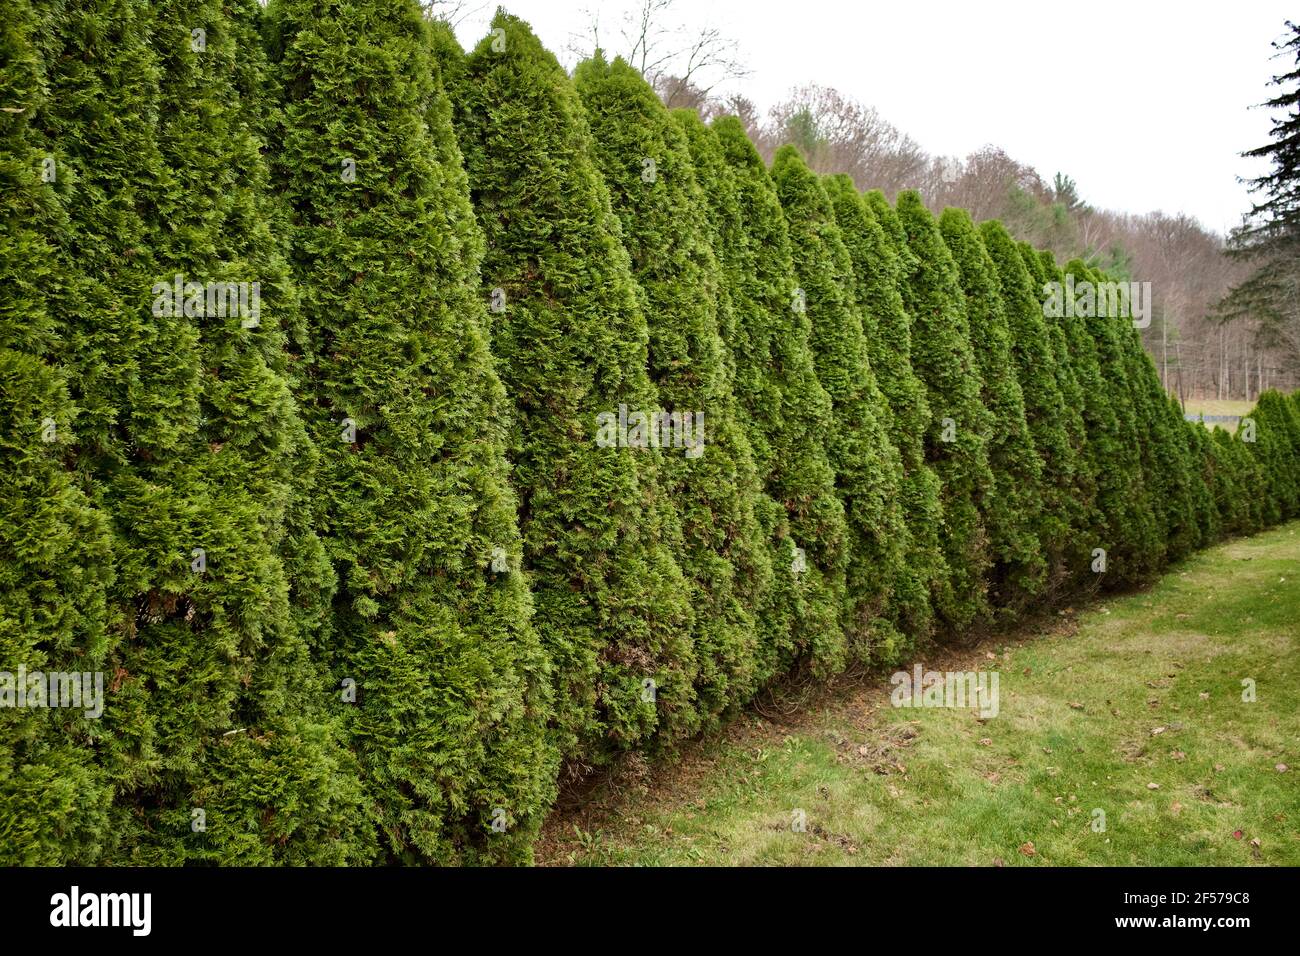 A long garden hedge of evergreen shrubs with no people. Strong perspective in this horizontal photograph Stock Photo